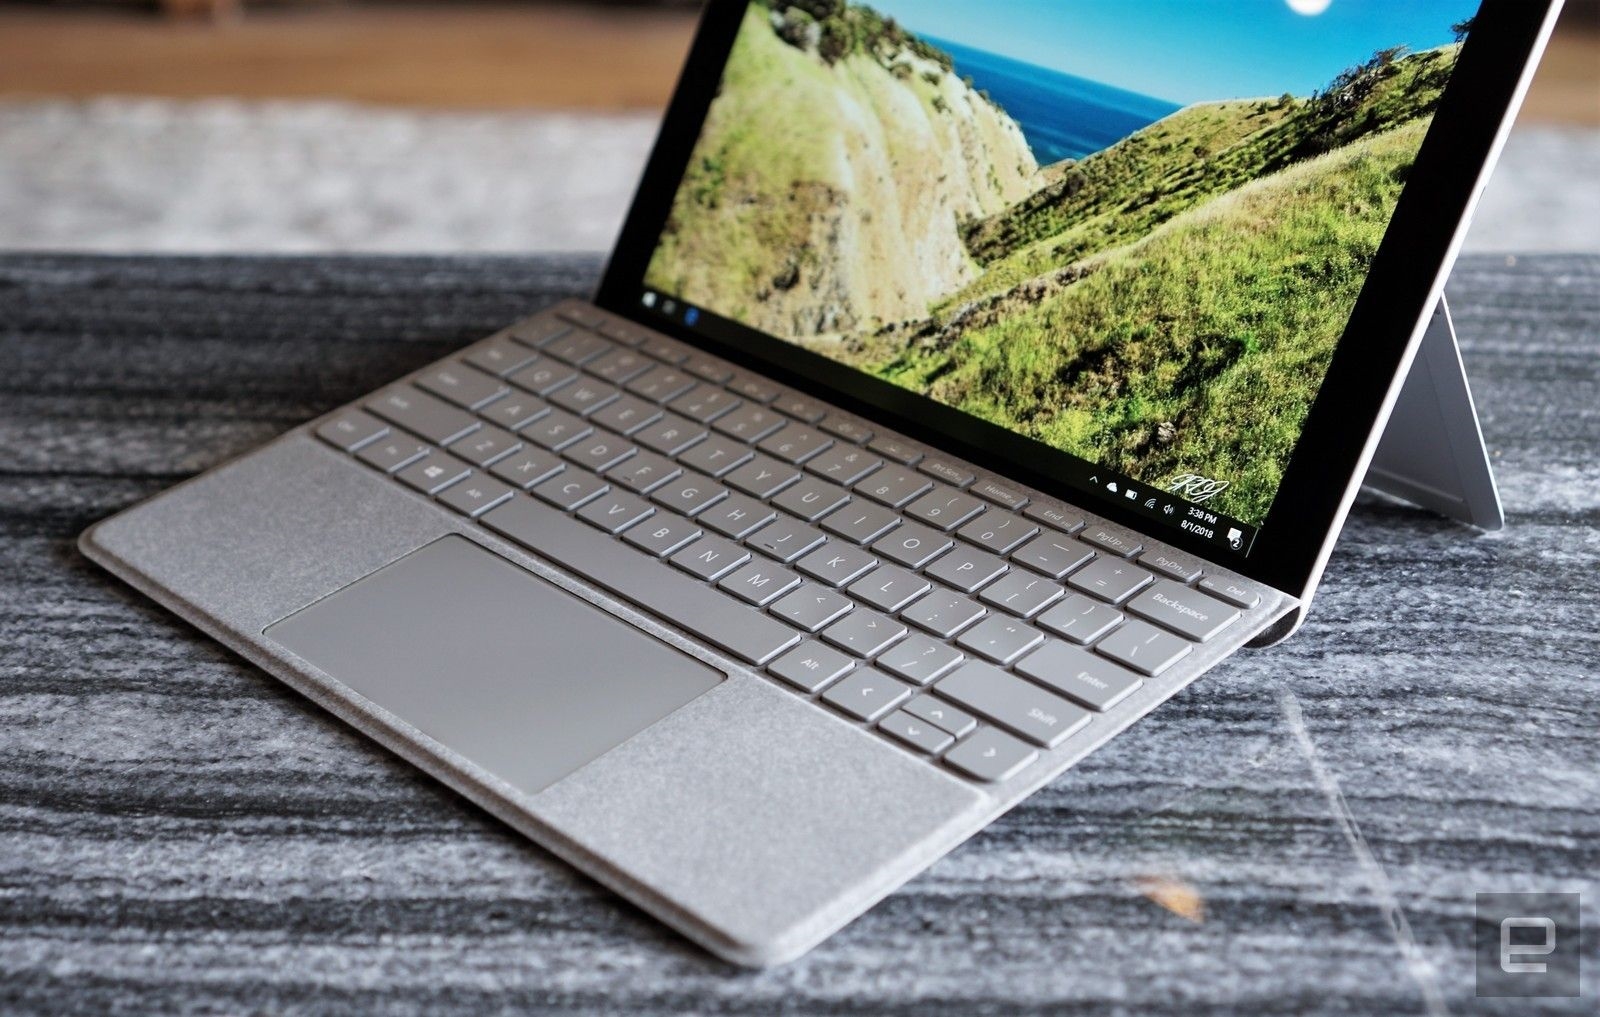 Microsoft's next Surface Go could up the screen size to 10.5 inches | DeviceDaily.com